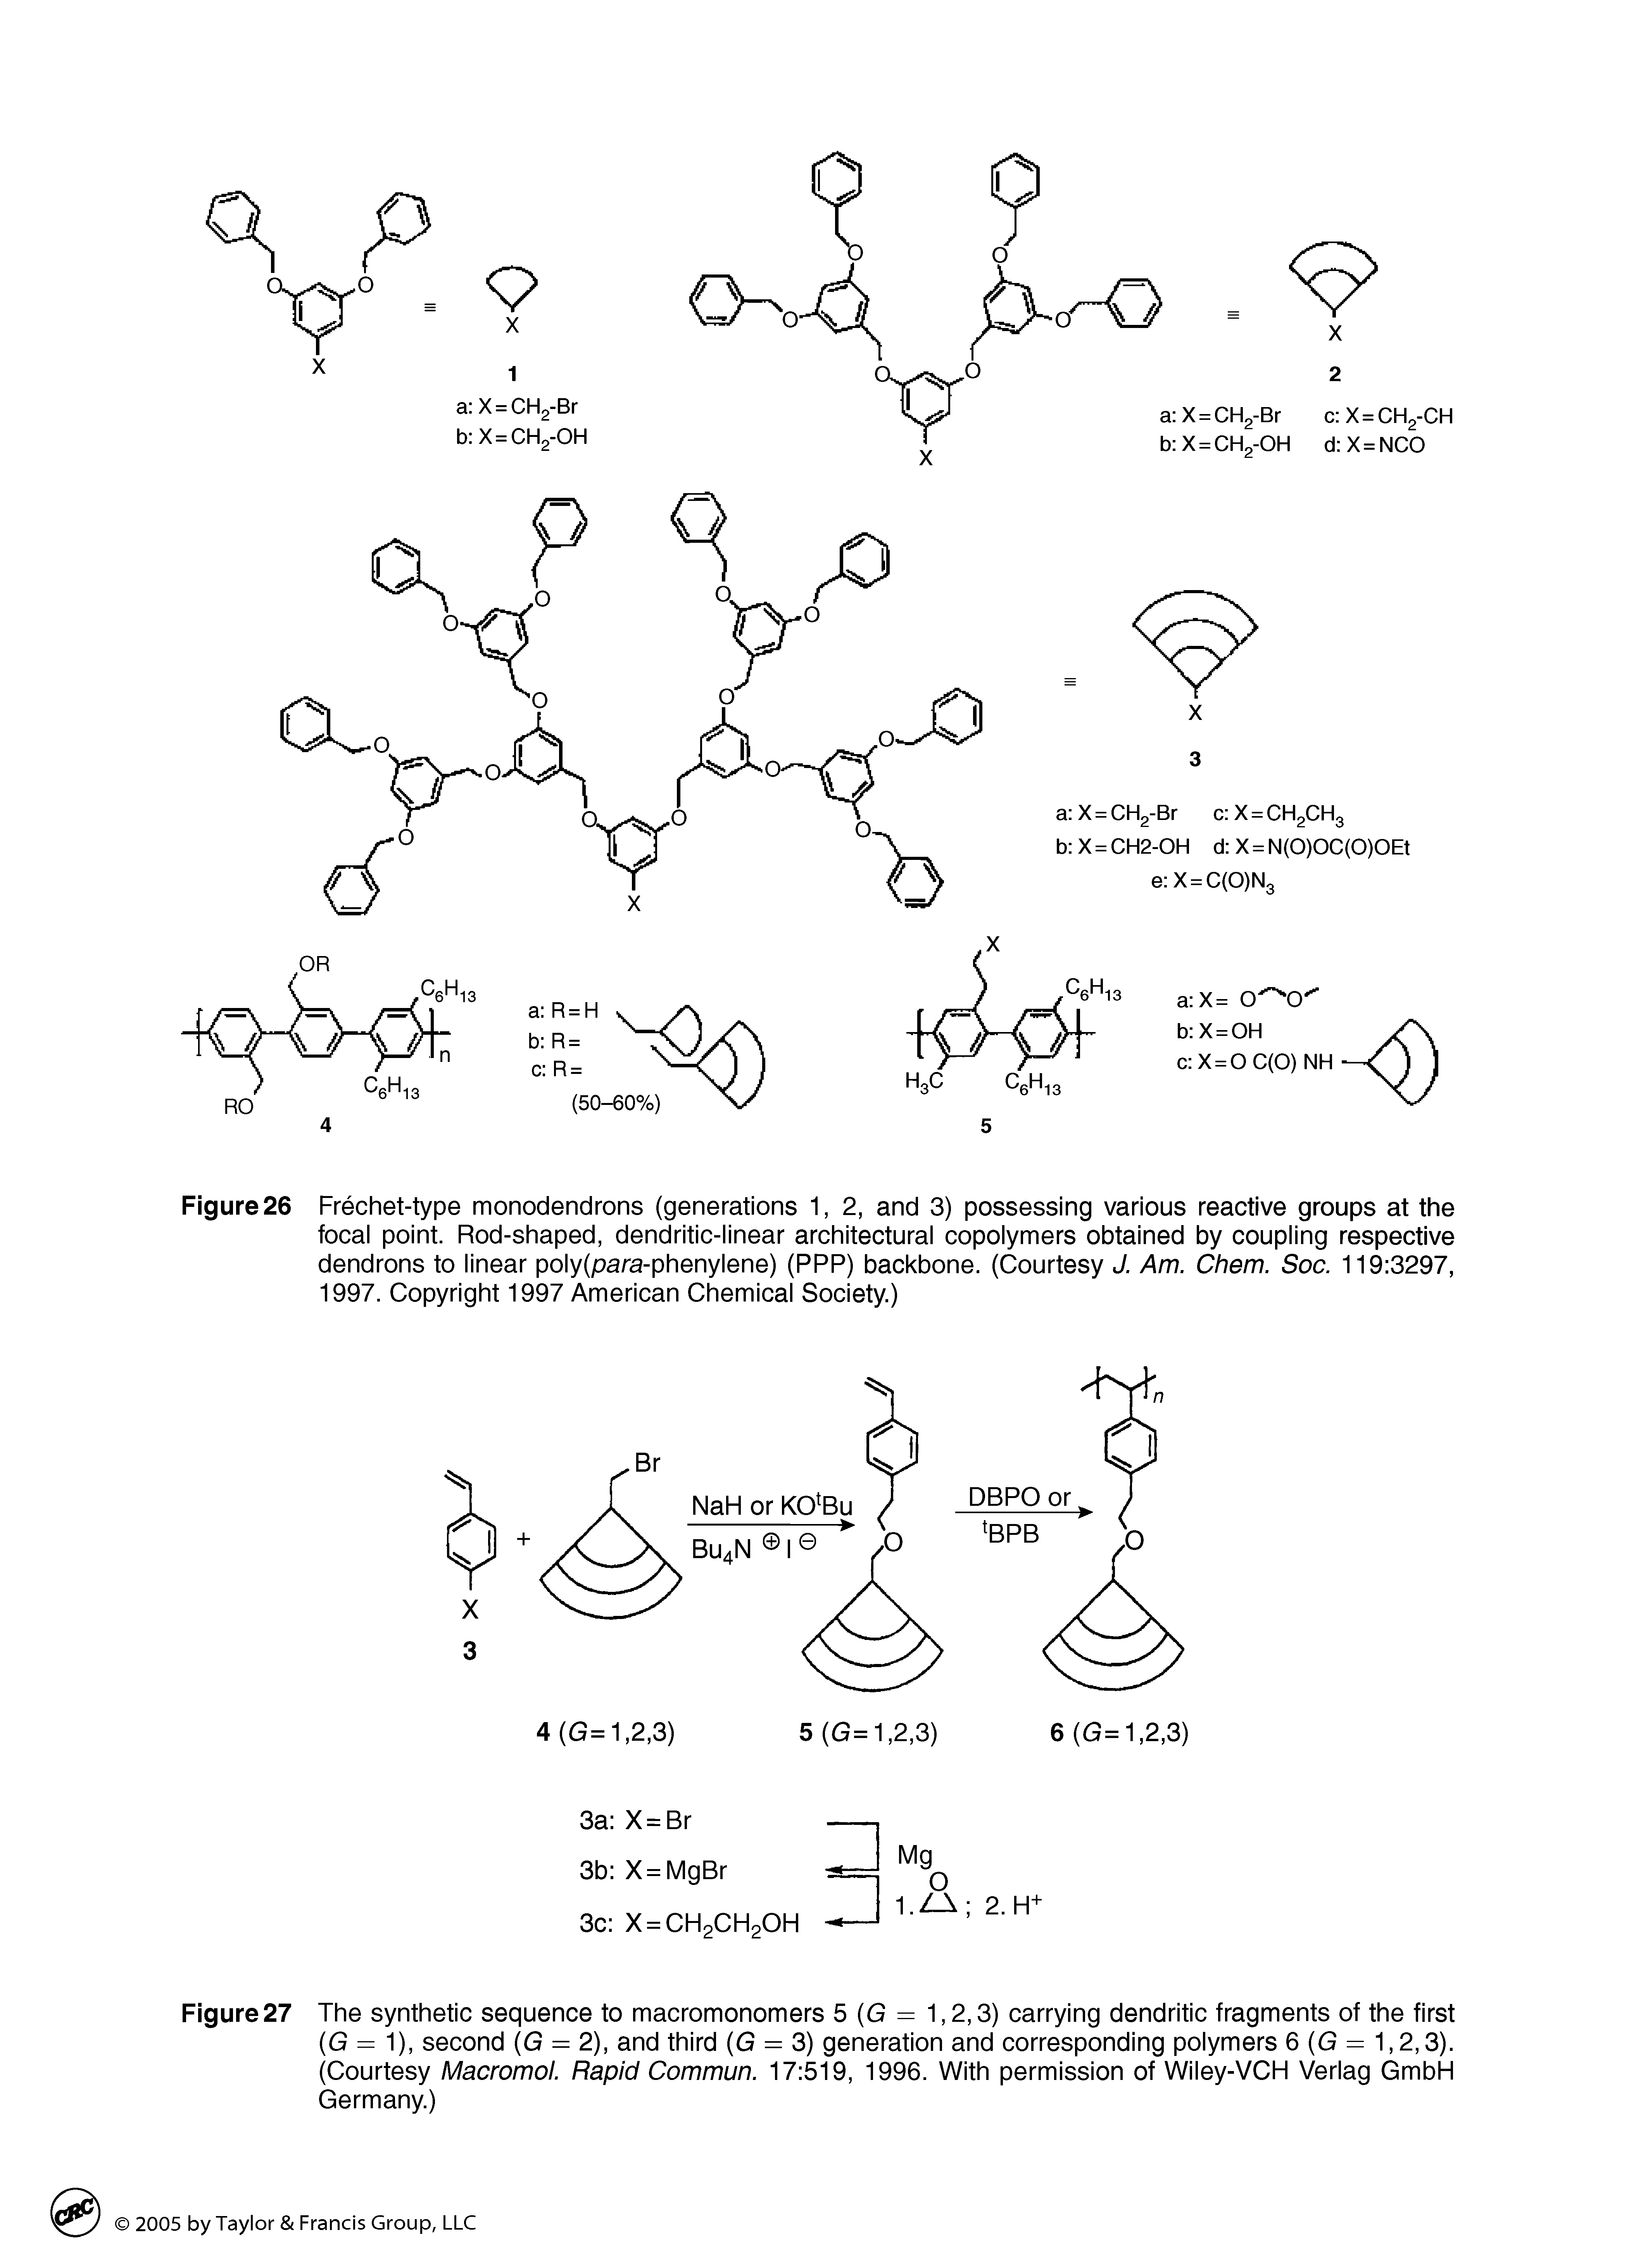 Figure 26 Frechet-type monodendrons (generations 1, 2, and 3) possessing various reactive groups at the focal point. Rod-shaped, dendritic-linear architectural copolymers obtained by coupling respective dendrons to linear poly(para-phenylene) (PPP) backbone. (Courtesy J. Am. Chem. Soc. 119 3297, 1997. Copyright 1997 American Chemical Society.)...